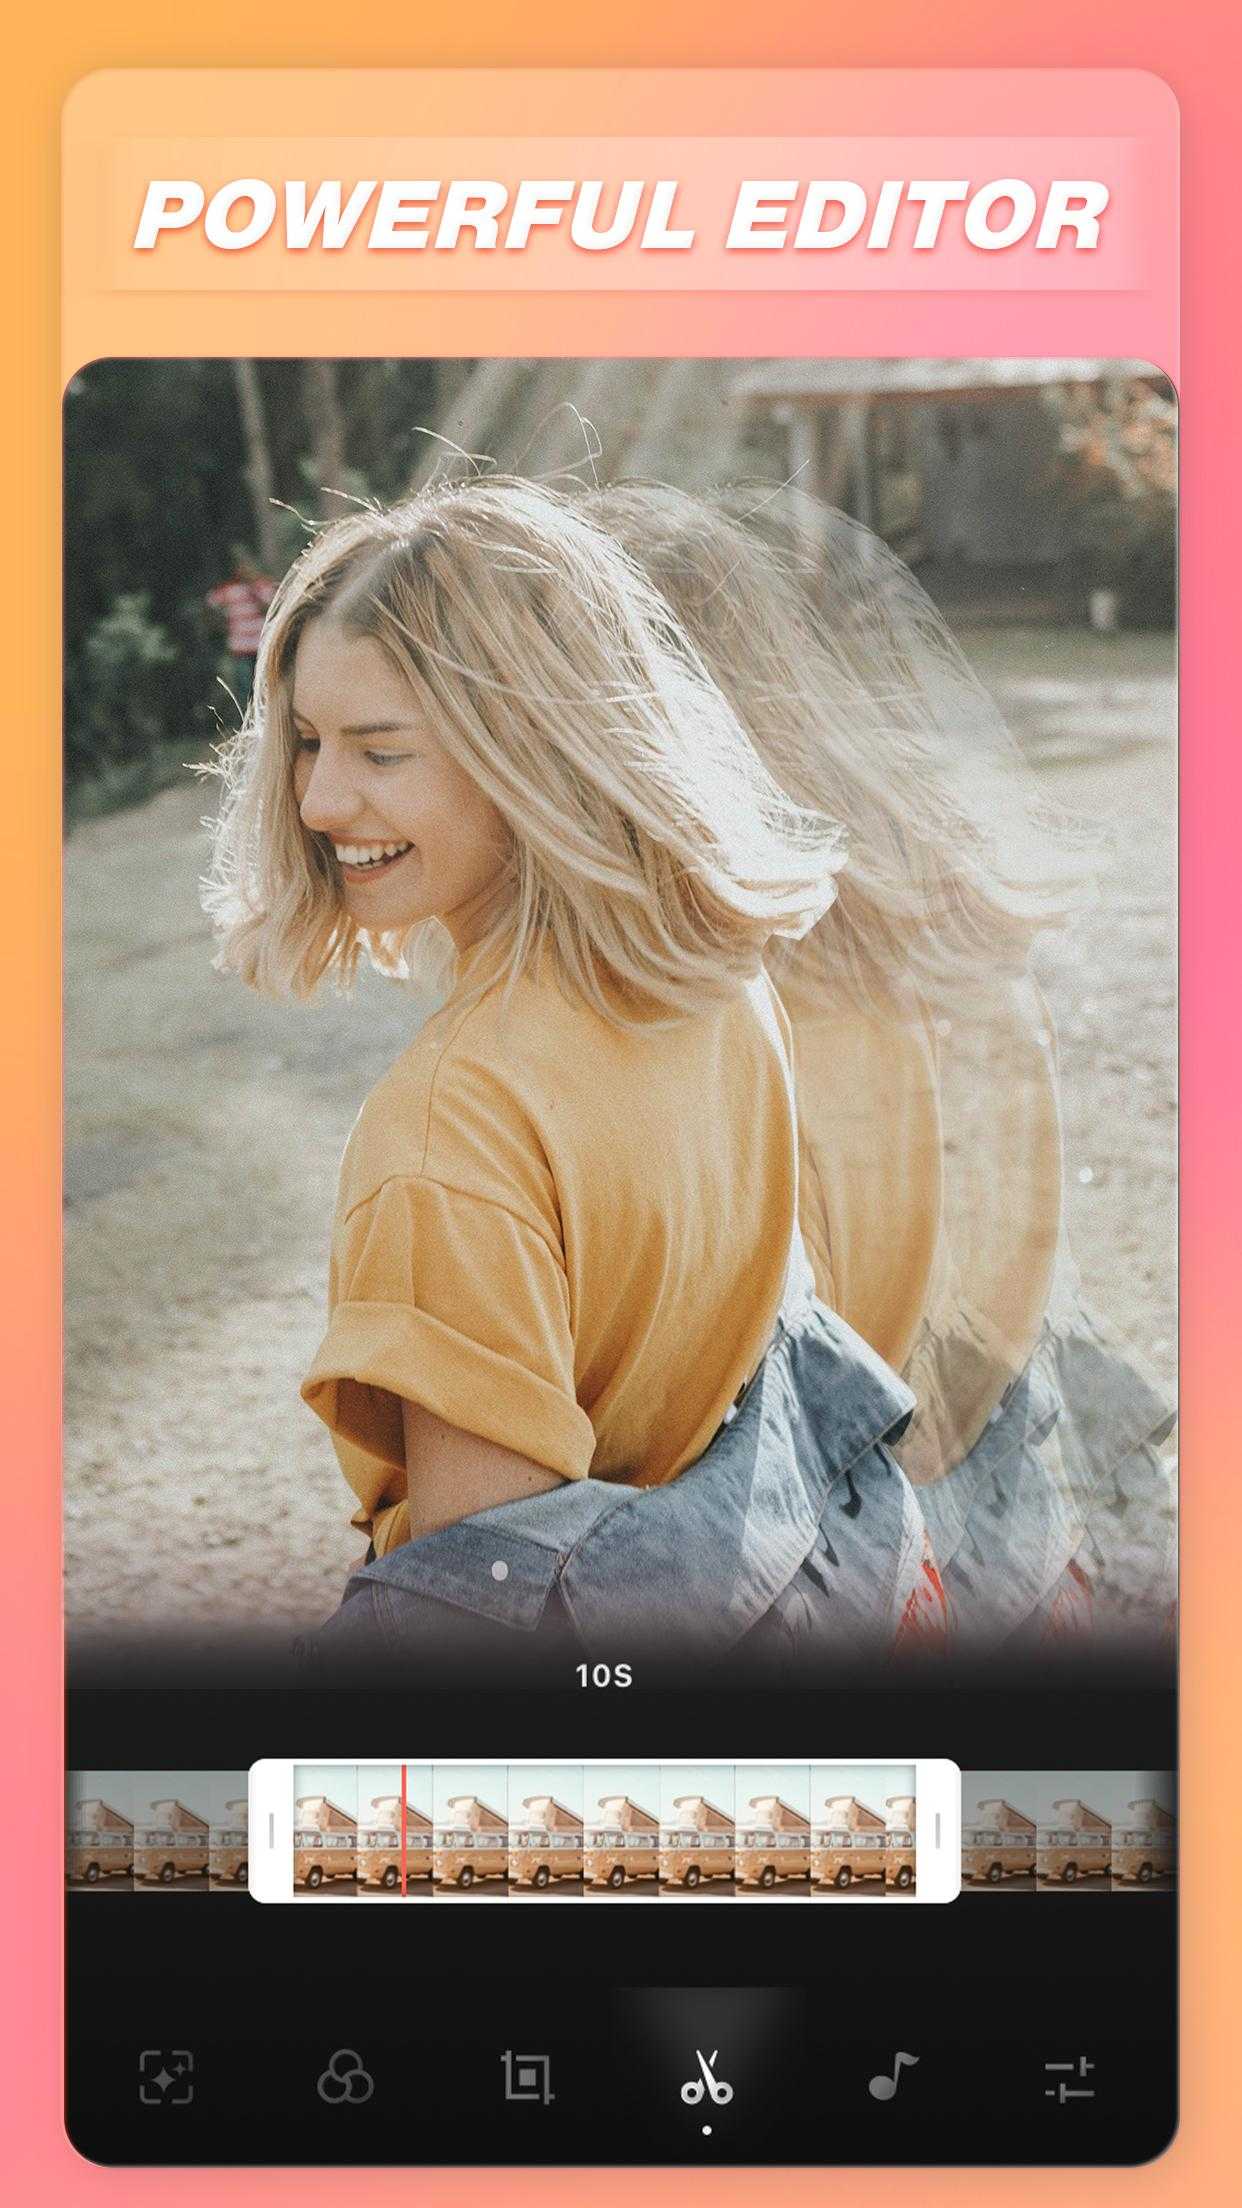 Video Effects & Aesthetic Filter Editor – Fito.ly v2.4.102 (Mod) (Premium) APK